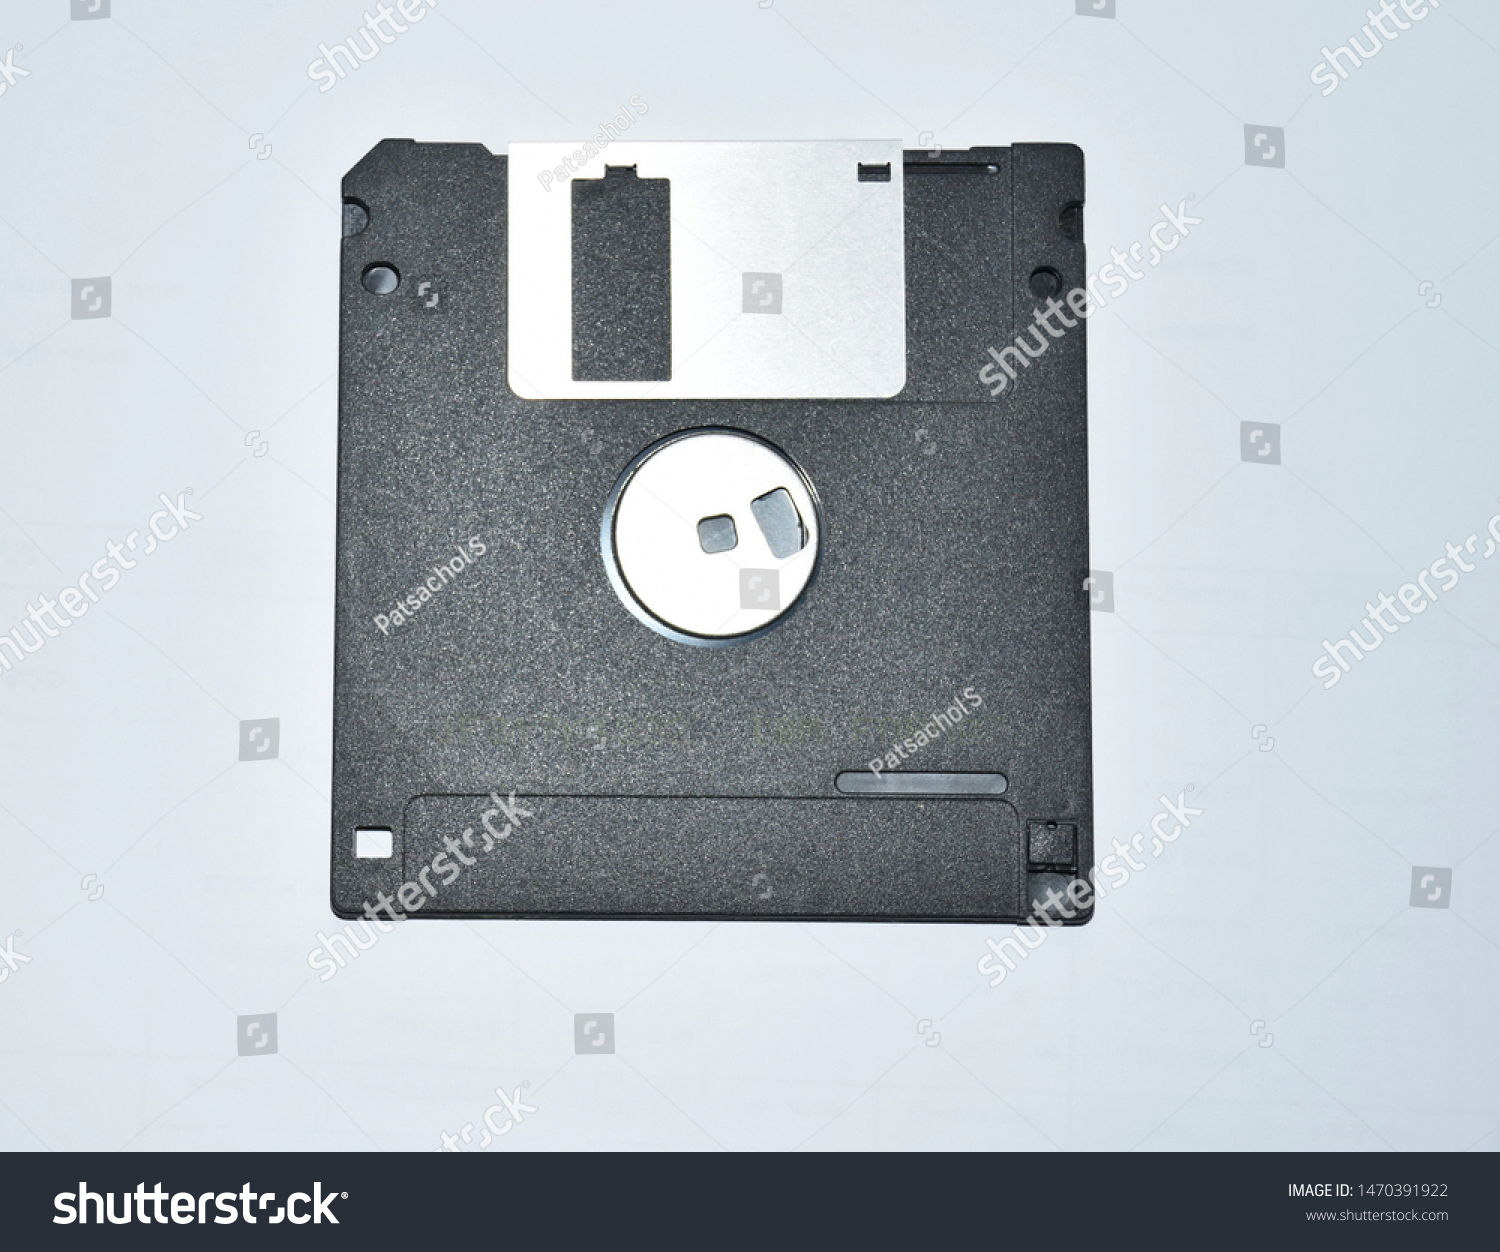 Old black square floppy disks, isolated on a white background. #1470391922